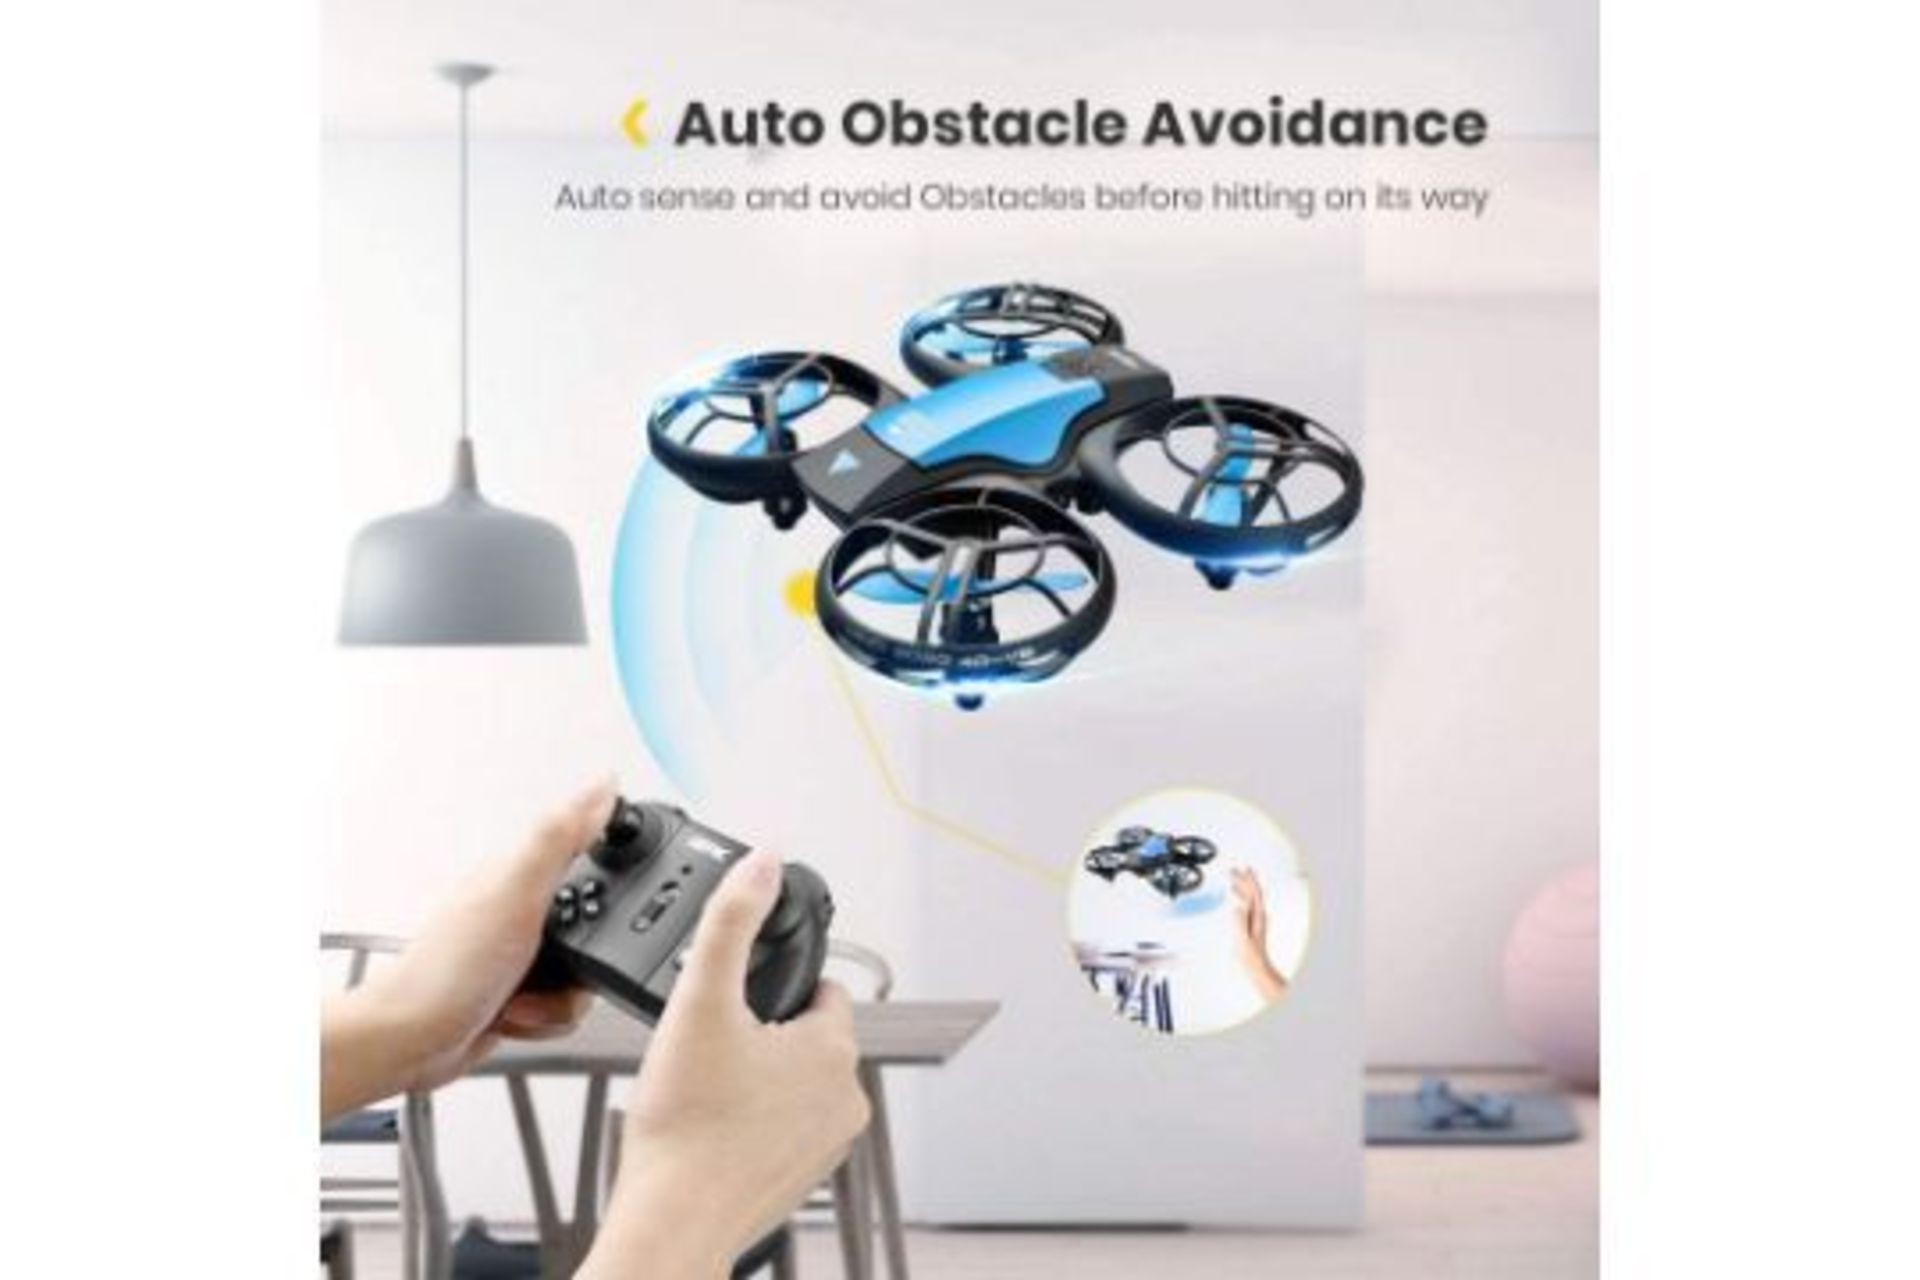 5 X 4DRC Mini Drone for Kids Hand Operated RC Quadcopter Longer Flight Time, (4DV8) Altitude Hold, - Image 2 of 3